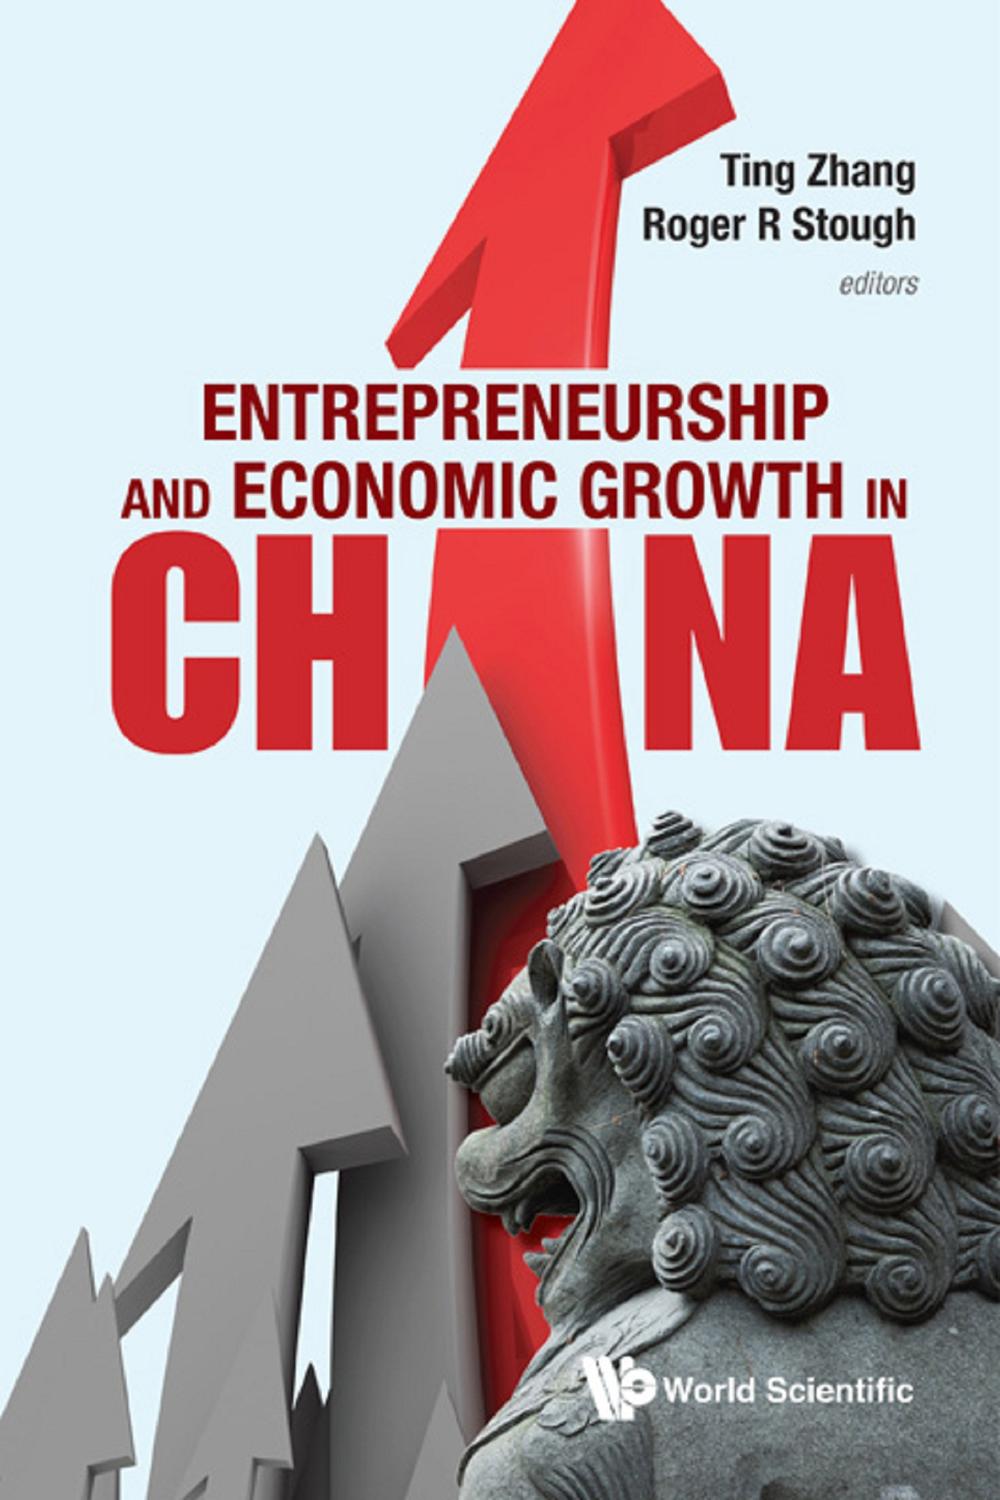 Entrepreneurship And Economic Growth In China - Ting Zhang, Roger R Stough